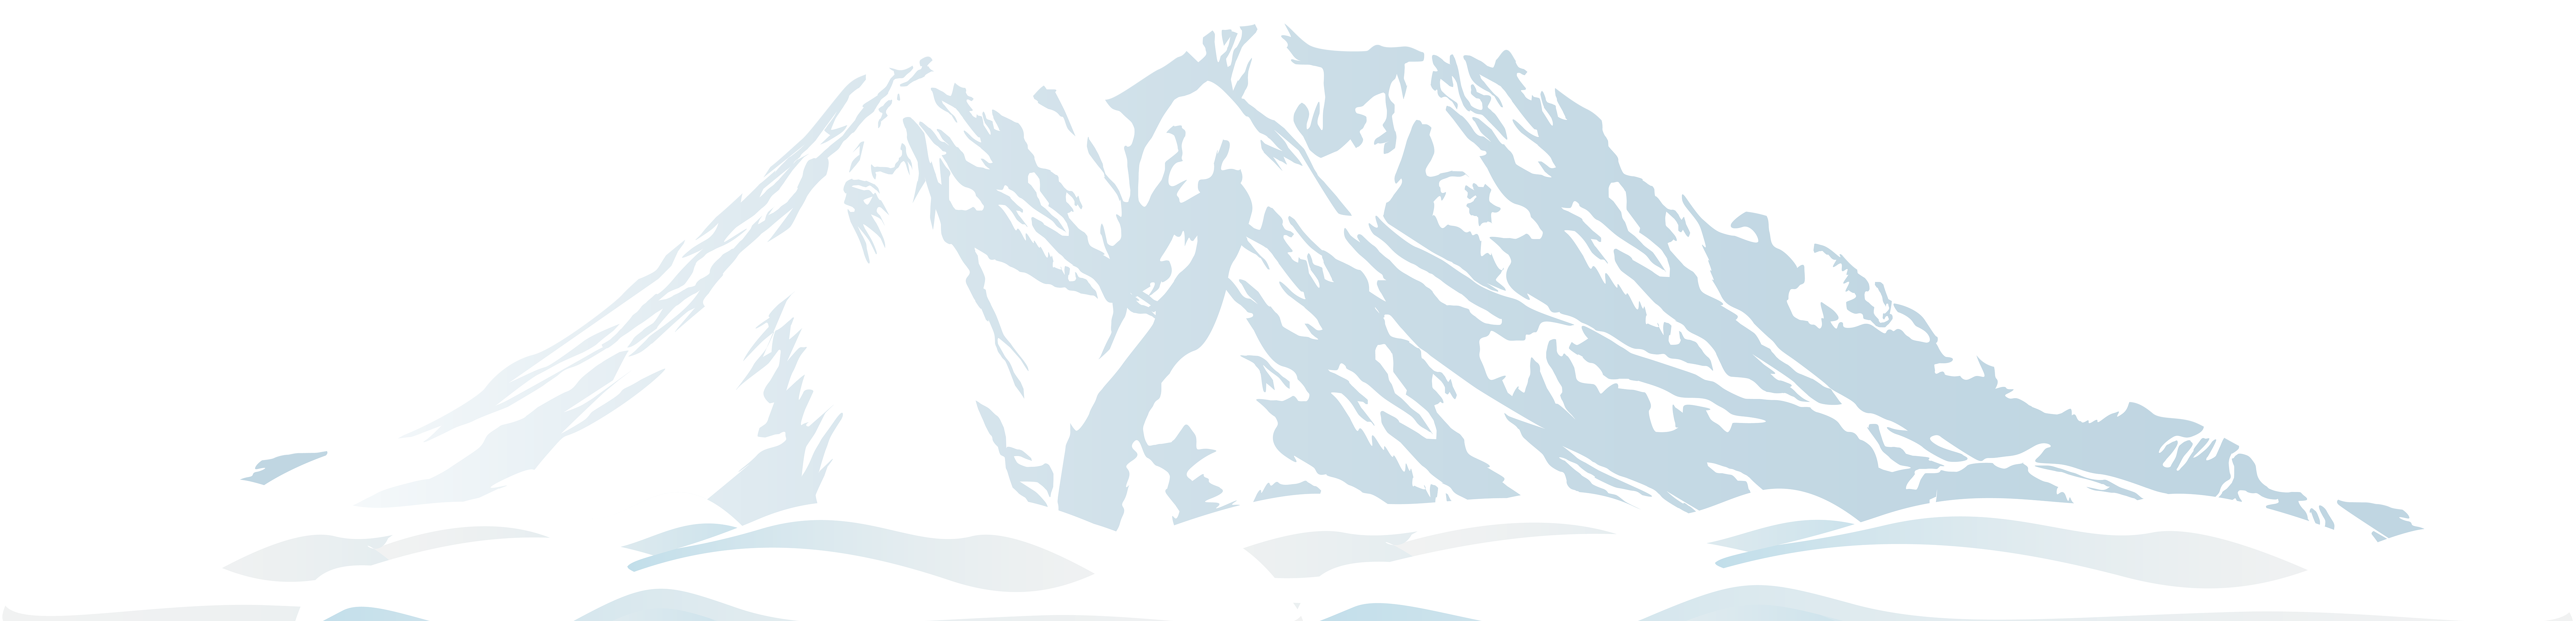 Mountain clipart summer. Snowy free download best